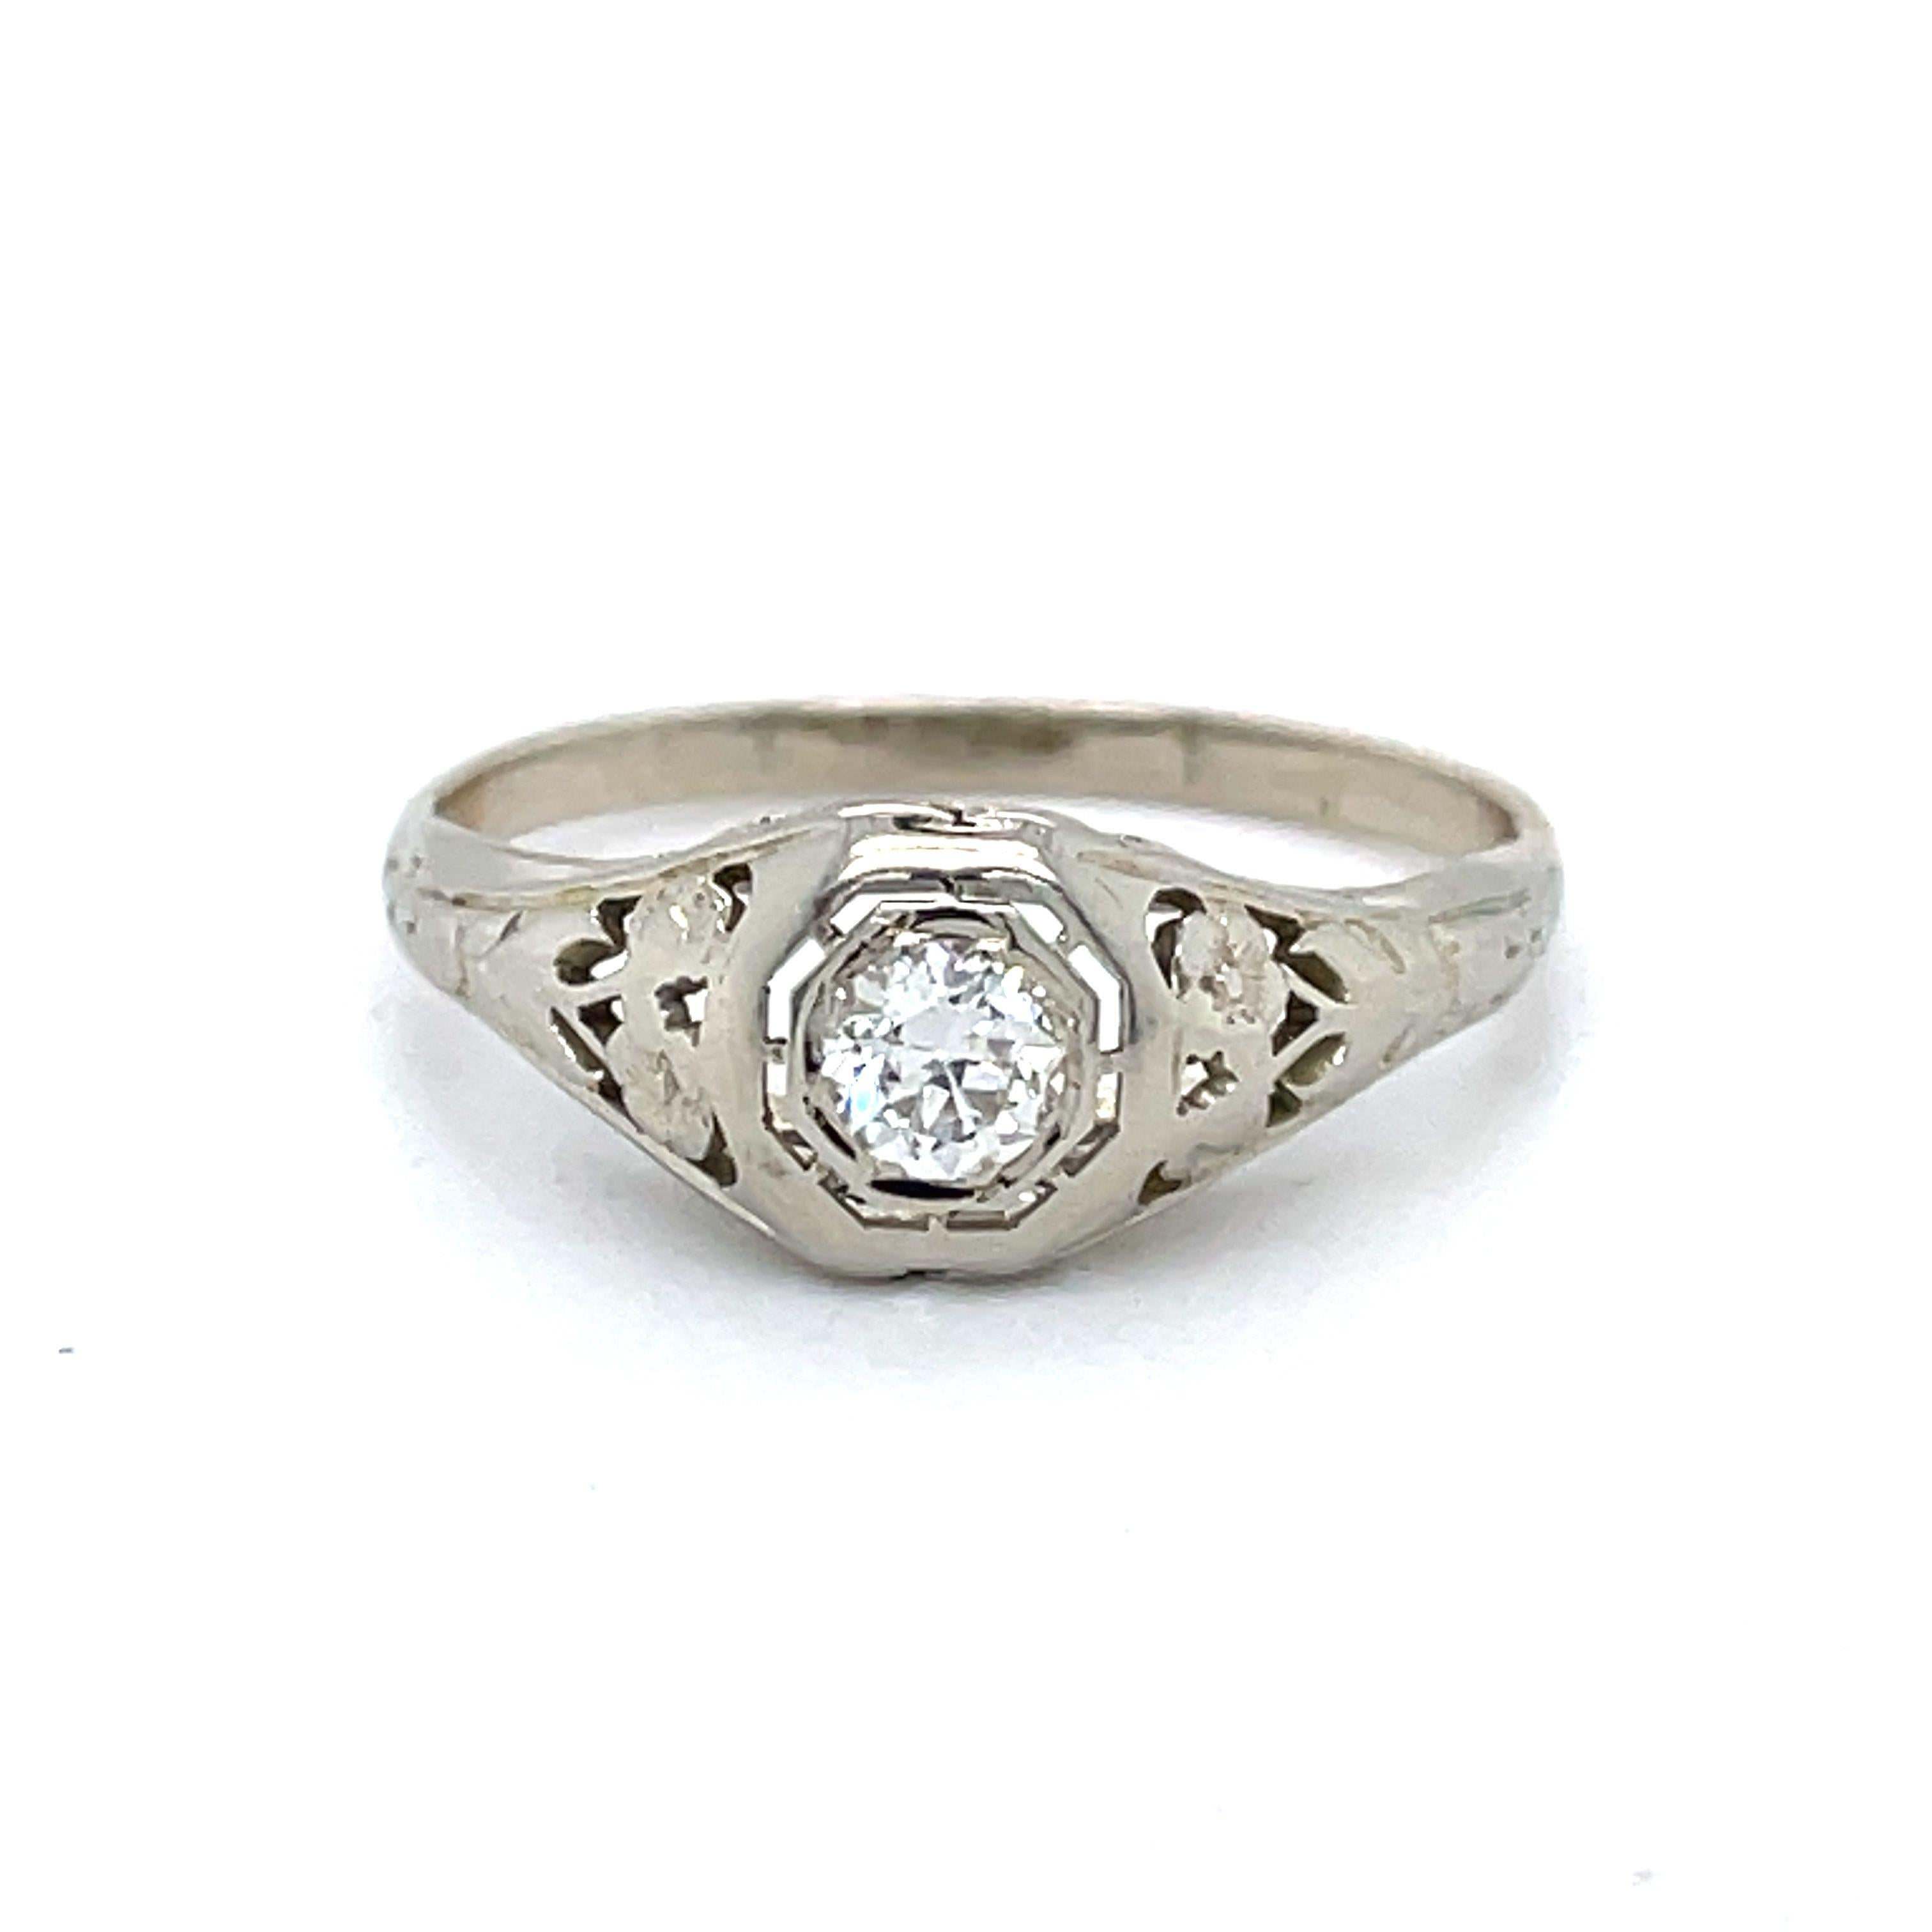 Dome Filigree Ring - 18K White gold dome ring, 0.15ct old European cut diamond For Sale 1